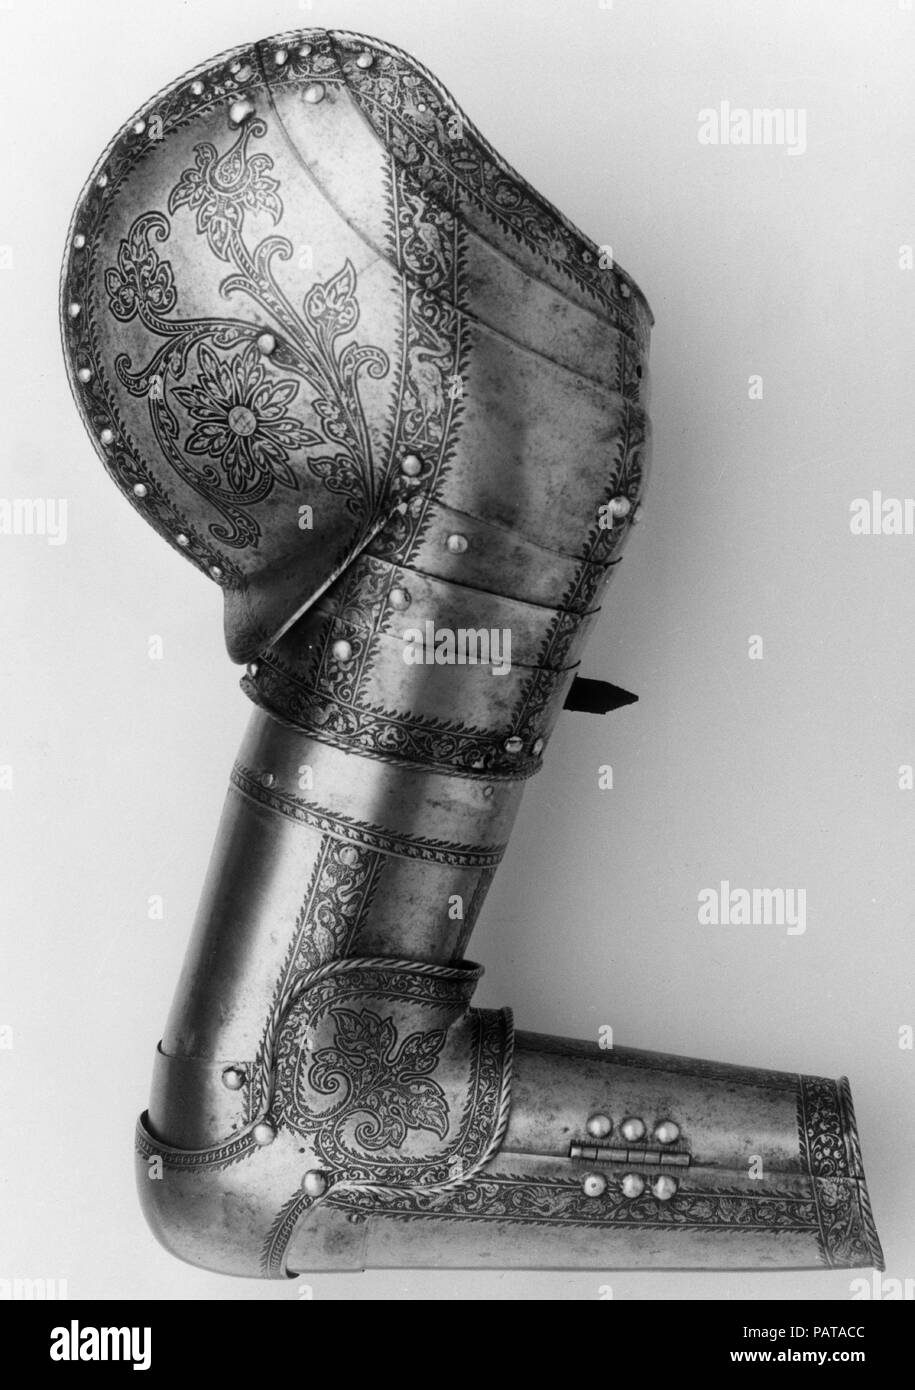 Elements of an Armor Garniture. Armorer: Attributed to Wolfgang Grosschedel (German, Landshut, active ca. 1517-62); Attributed to Franz Grosschedel (German, Landshut, recorded 1555-79). Culture: German, Landshut. Dimensions: right shoulder and arm defense (32.109.1a, b): H. approx. 28 in. (71.1 cm); W. approx. 10 in. (25.4 cm); Wt. 5 lb. 9 oz. (2523.1 g); left shoulder and arm defense (32.109.2a, b): L. approx. 28 in. (71.1 cm); W. approx. 10 in. (25.4 cm); Wt. 5 lb. 6 oz. (2438.1 g); right thigh and knee defense (32.109.3a-c): L. 20 in. (50.8 cm); W. 8 1/2 in. (21.6 cm); Wt. 3 lb. 3 oz. (1445 Stock Photo